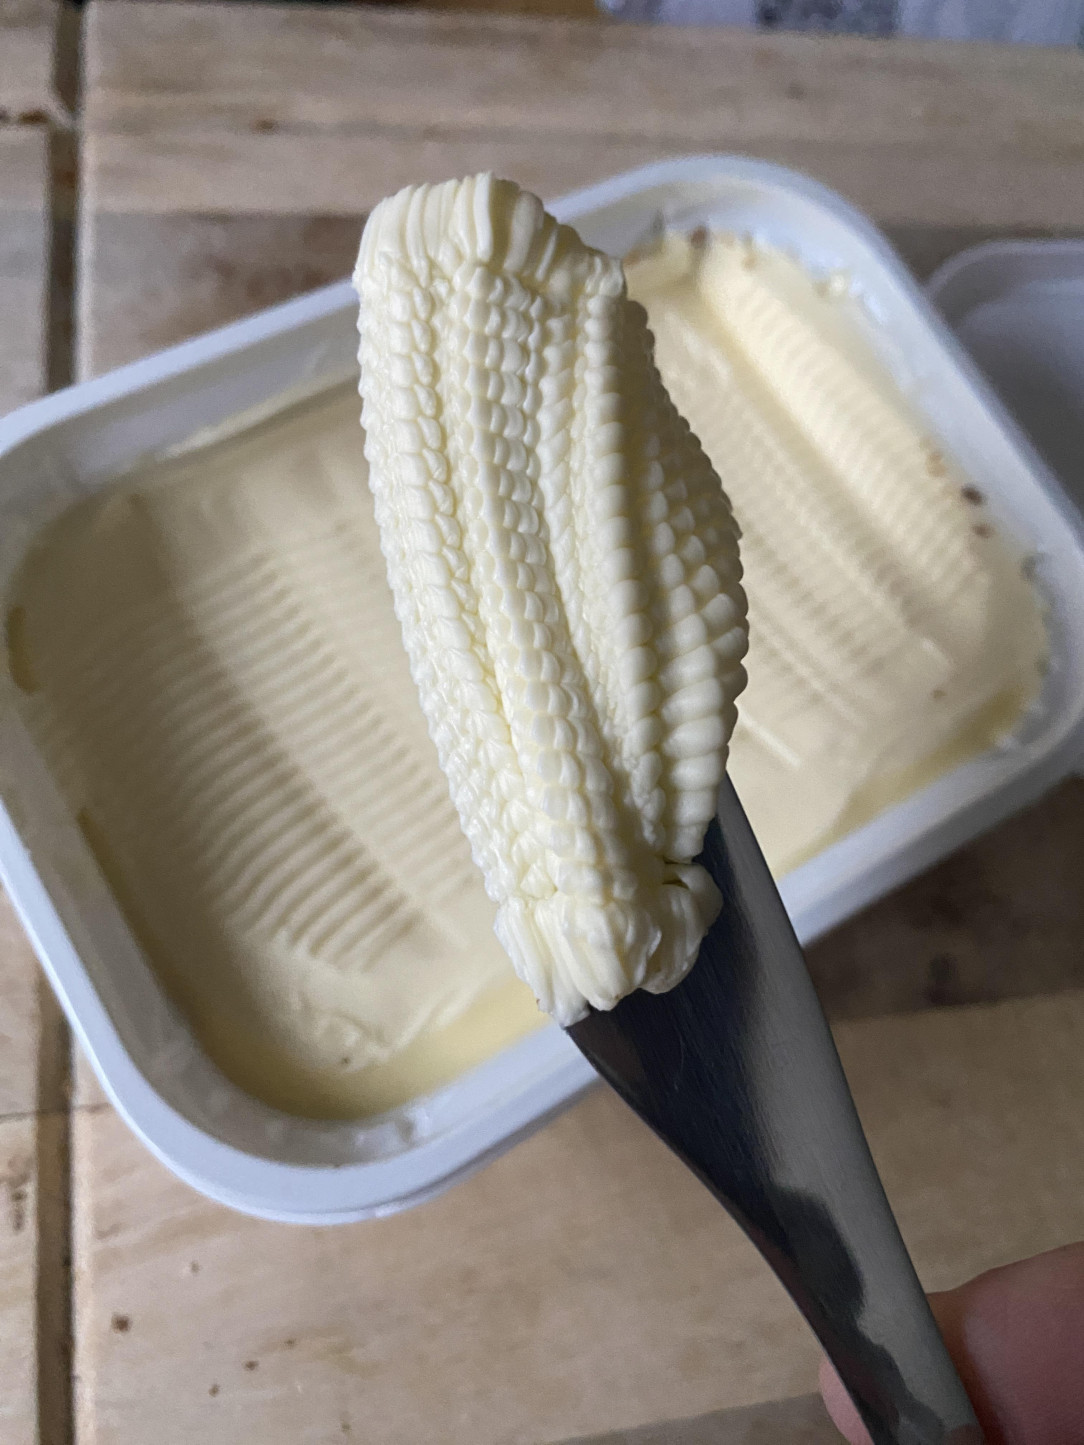 The way this butter lifted onto the knife